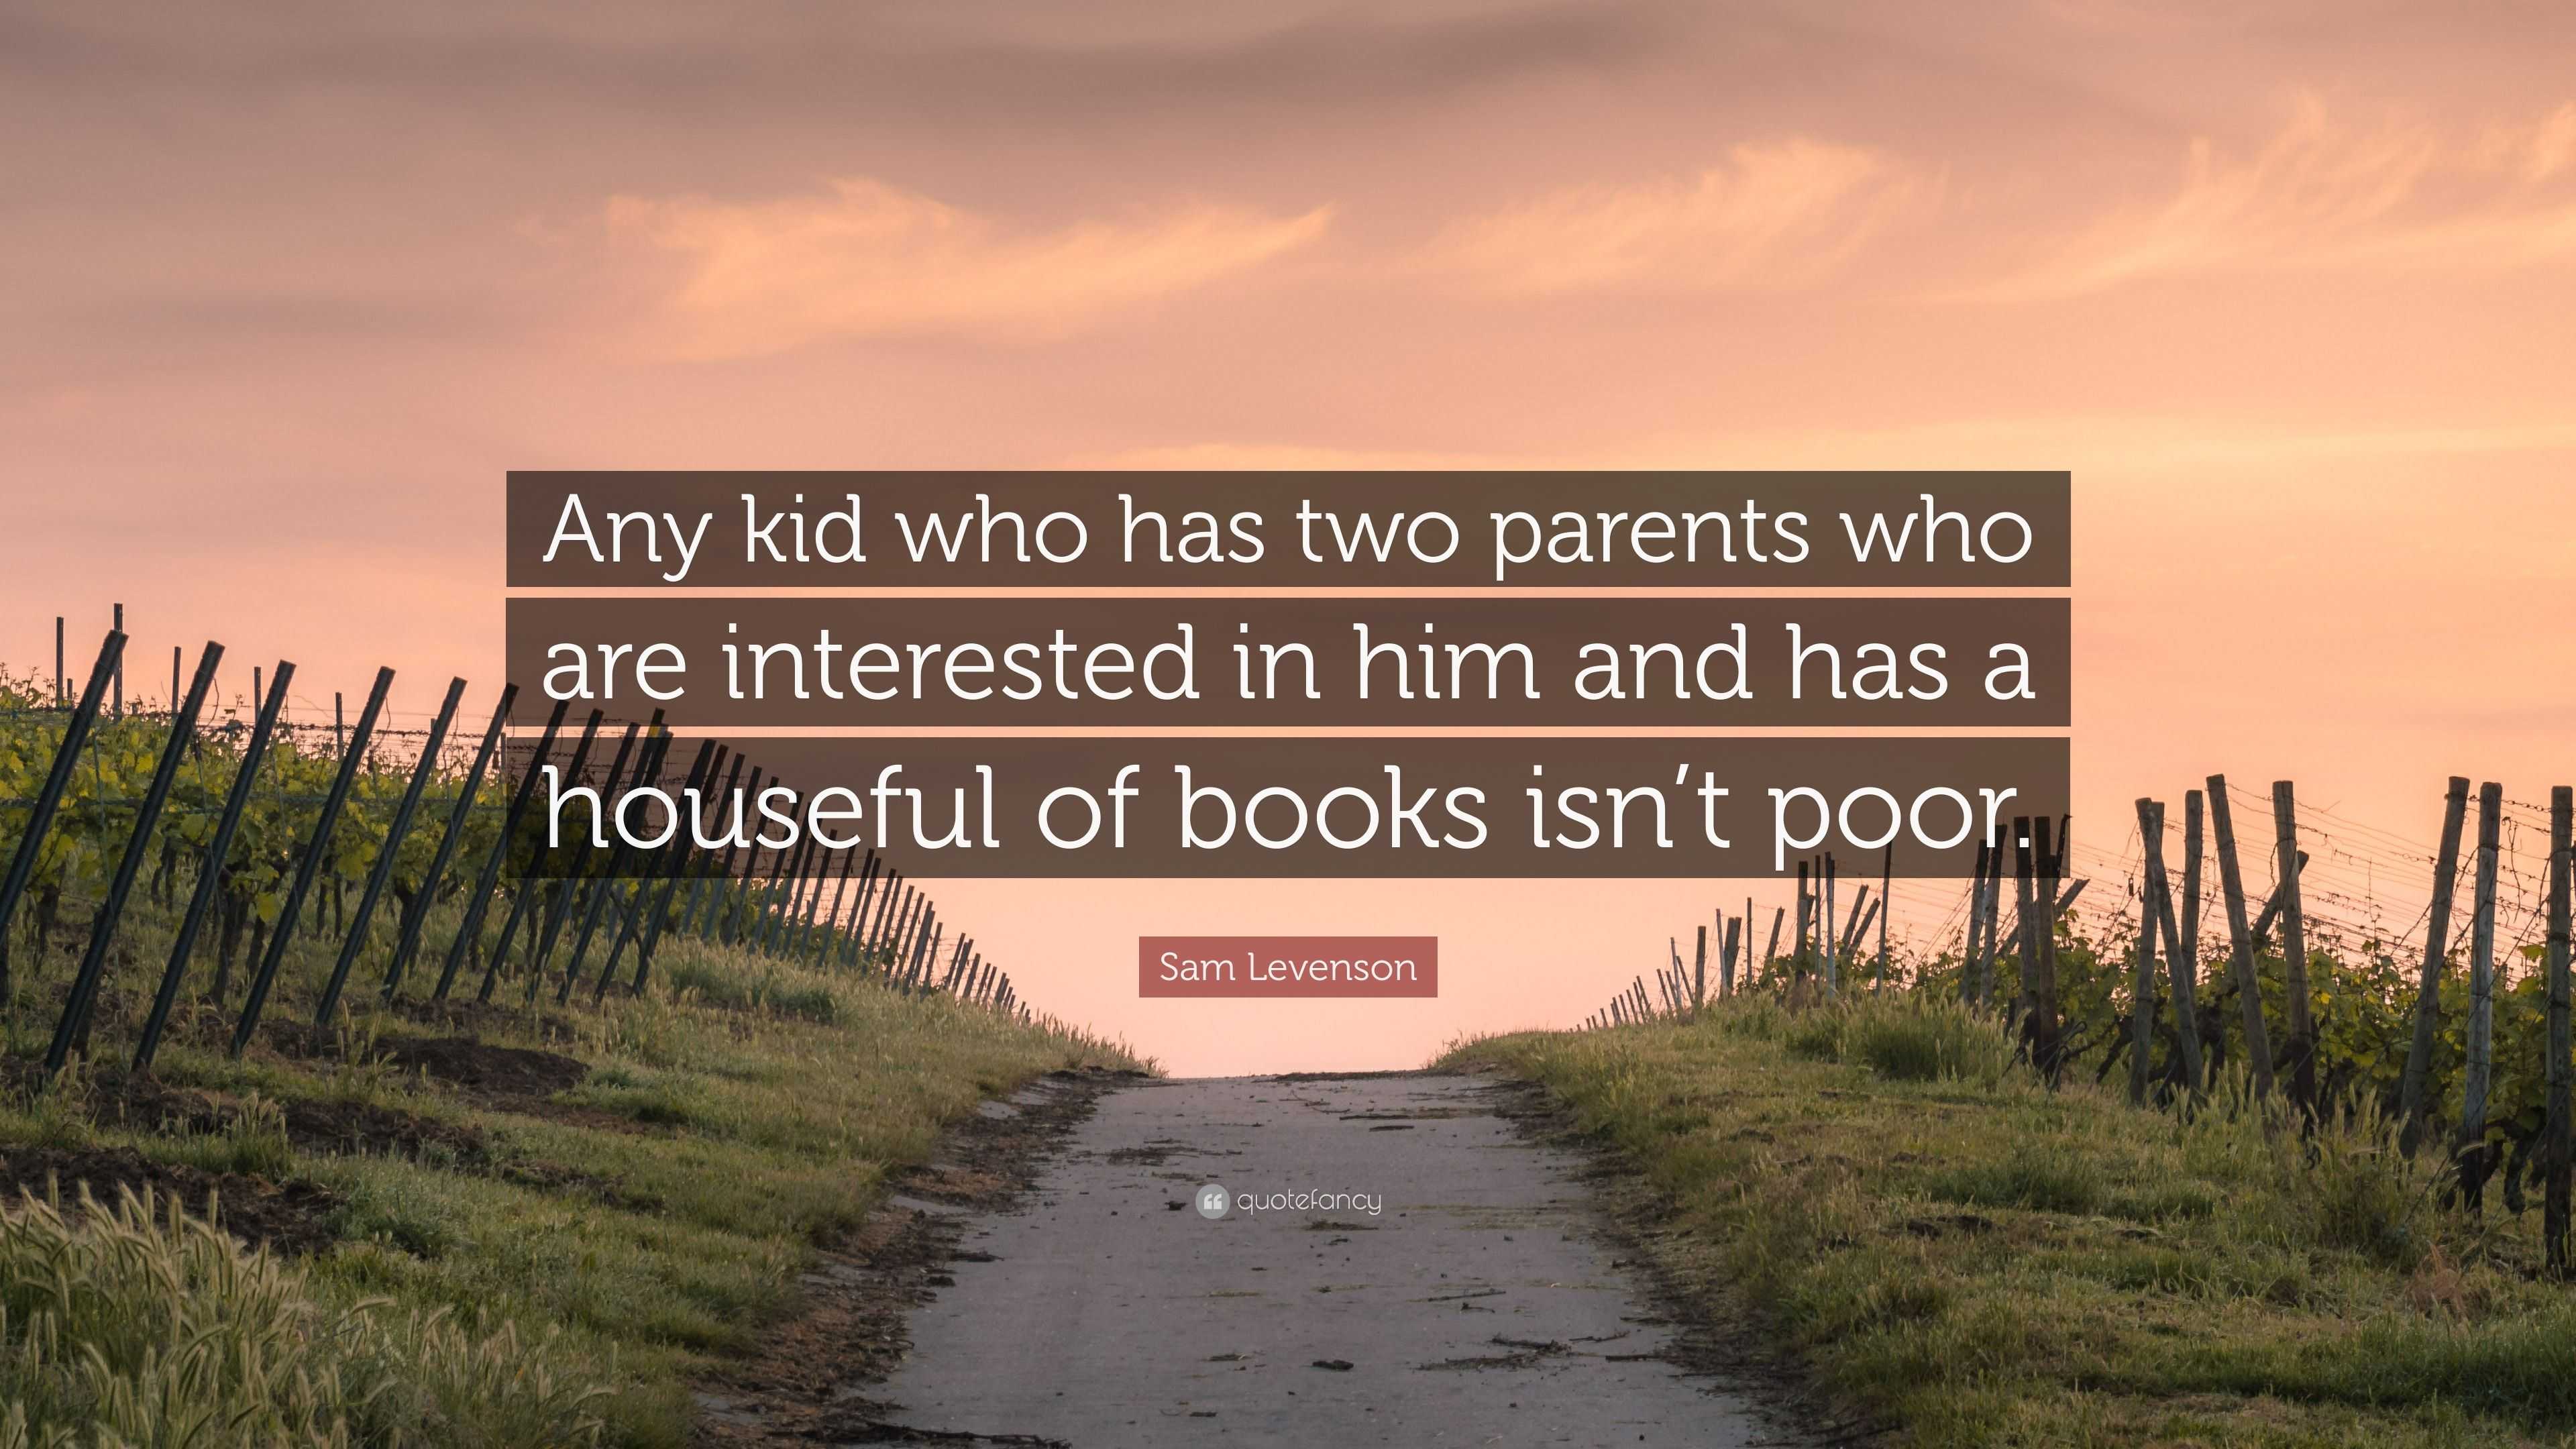 Sam Levenson Quote: "Any kid who has two parents who are ...